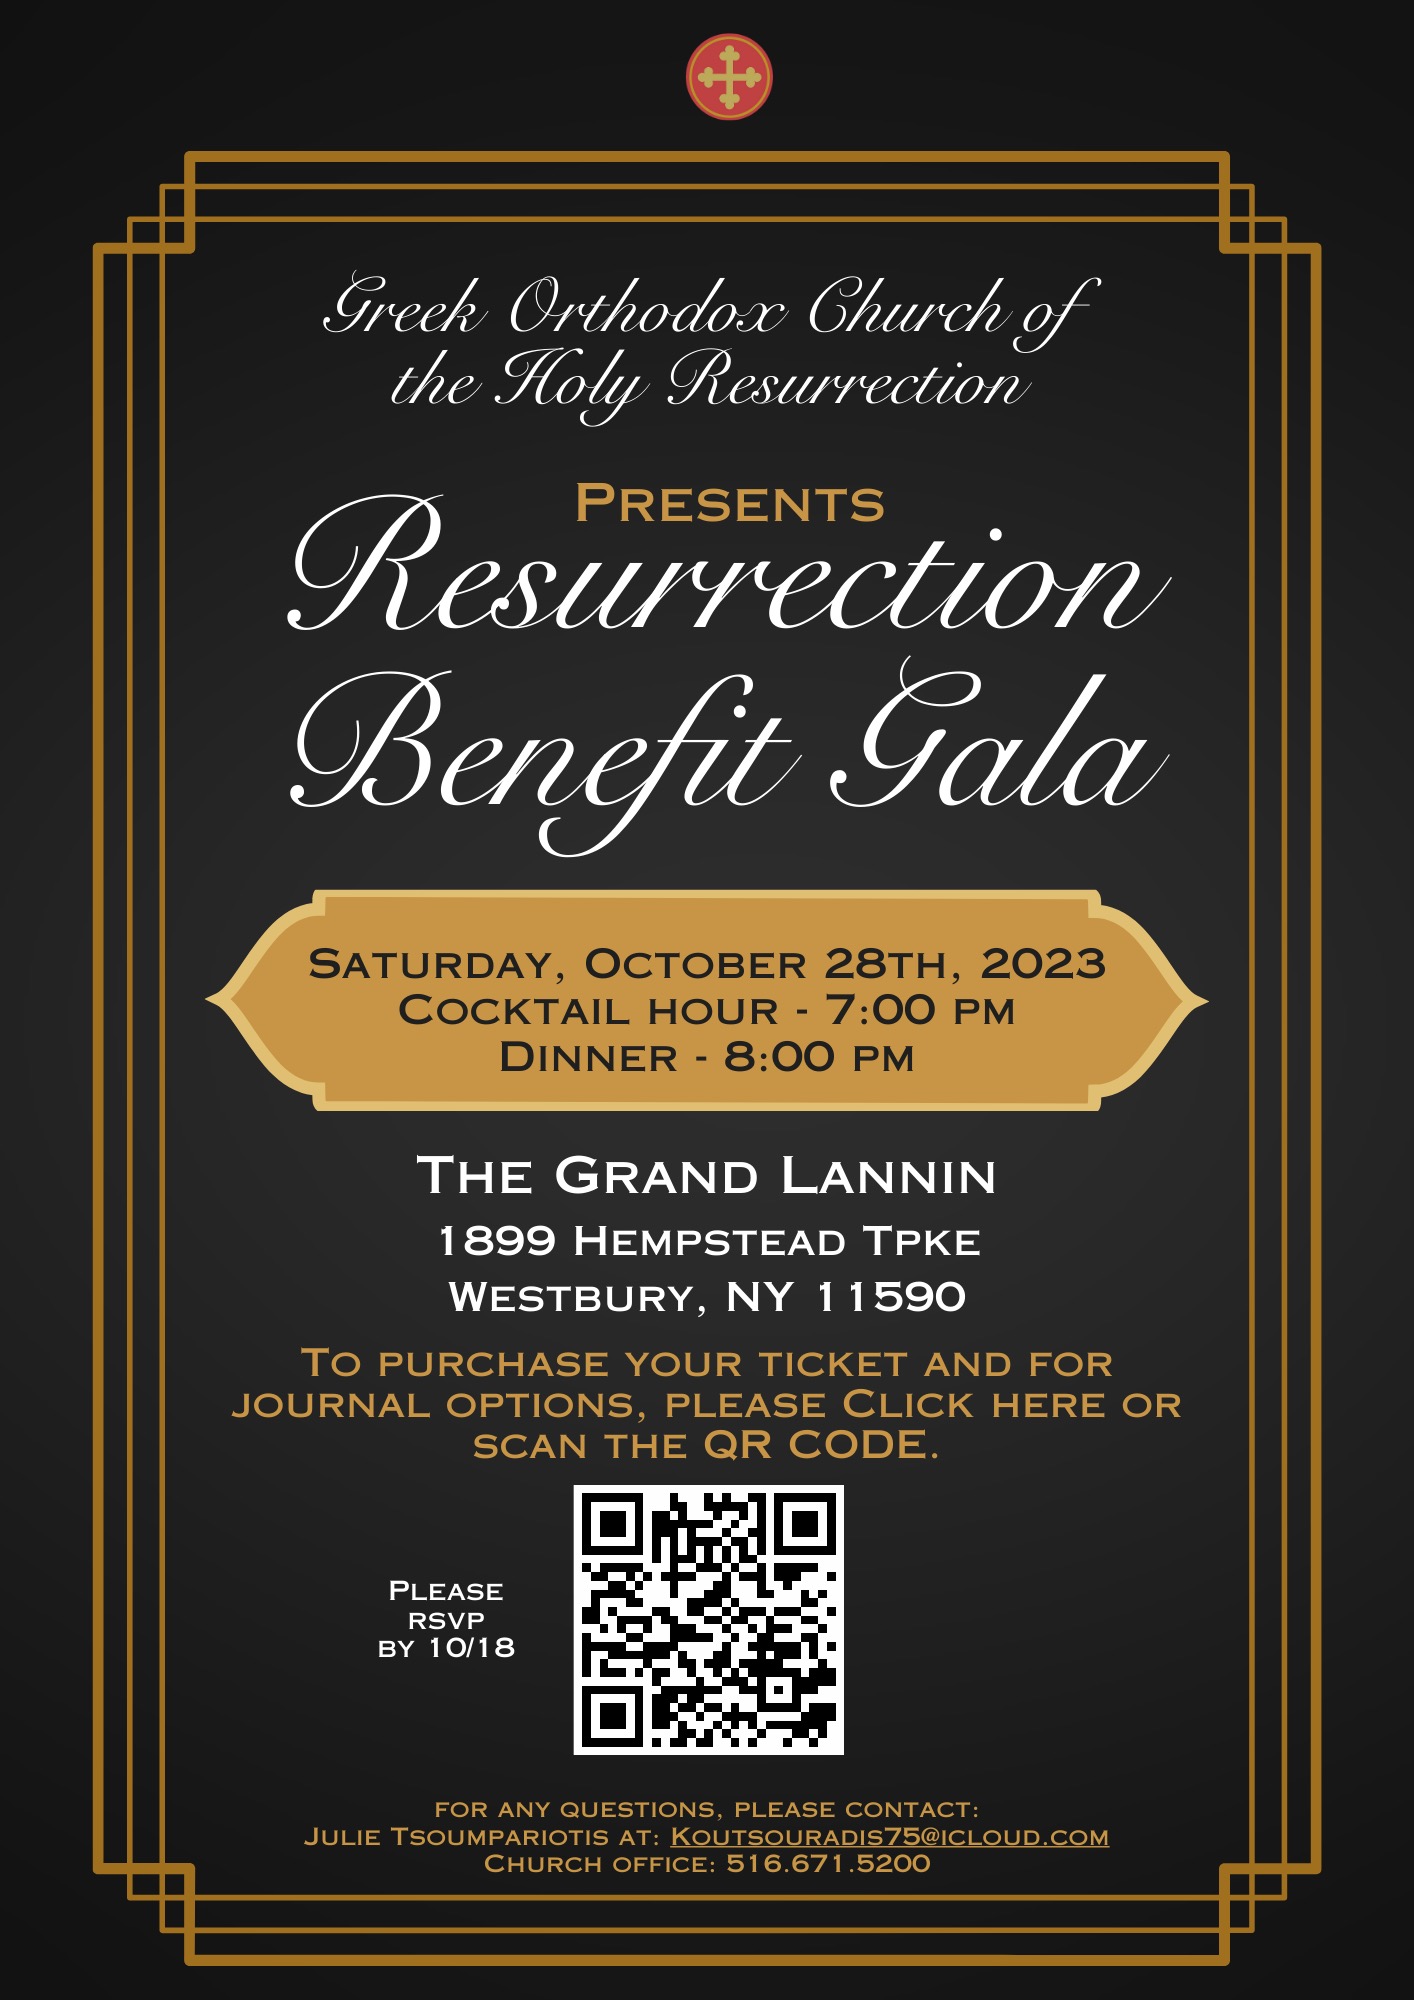 Holy Resurrection Benefit Gala. This is a great venue with fantastic fellowship opportunities.